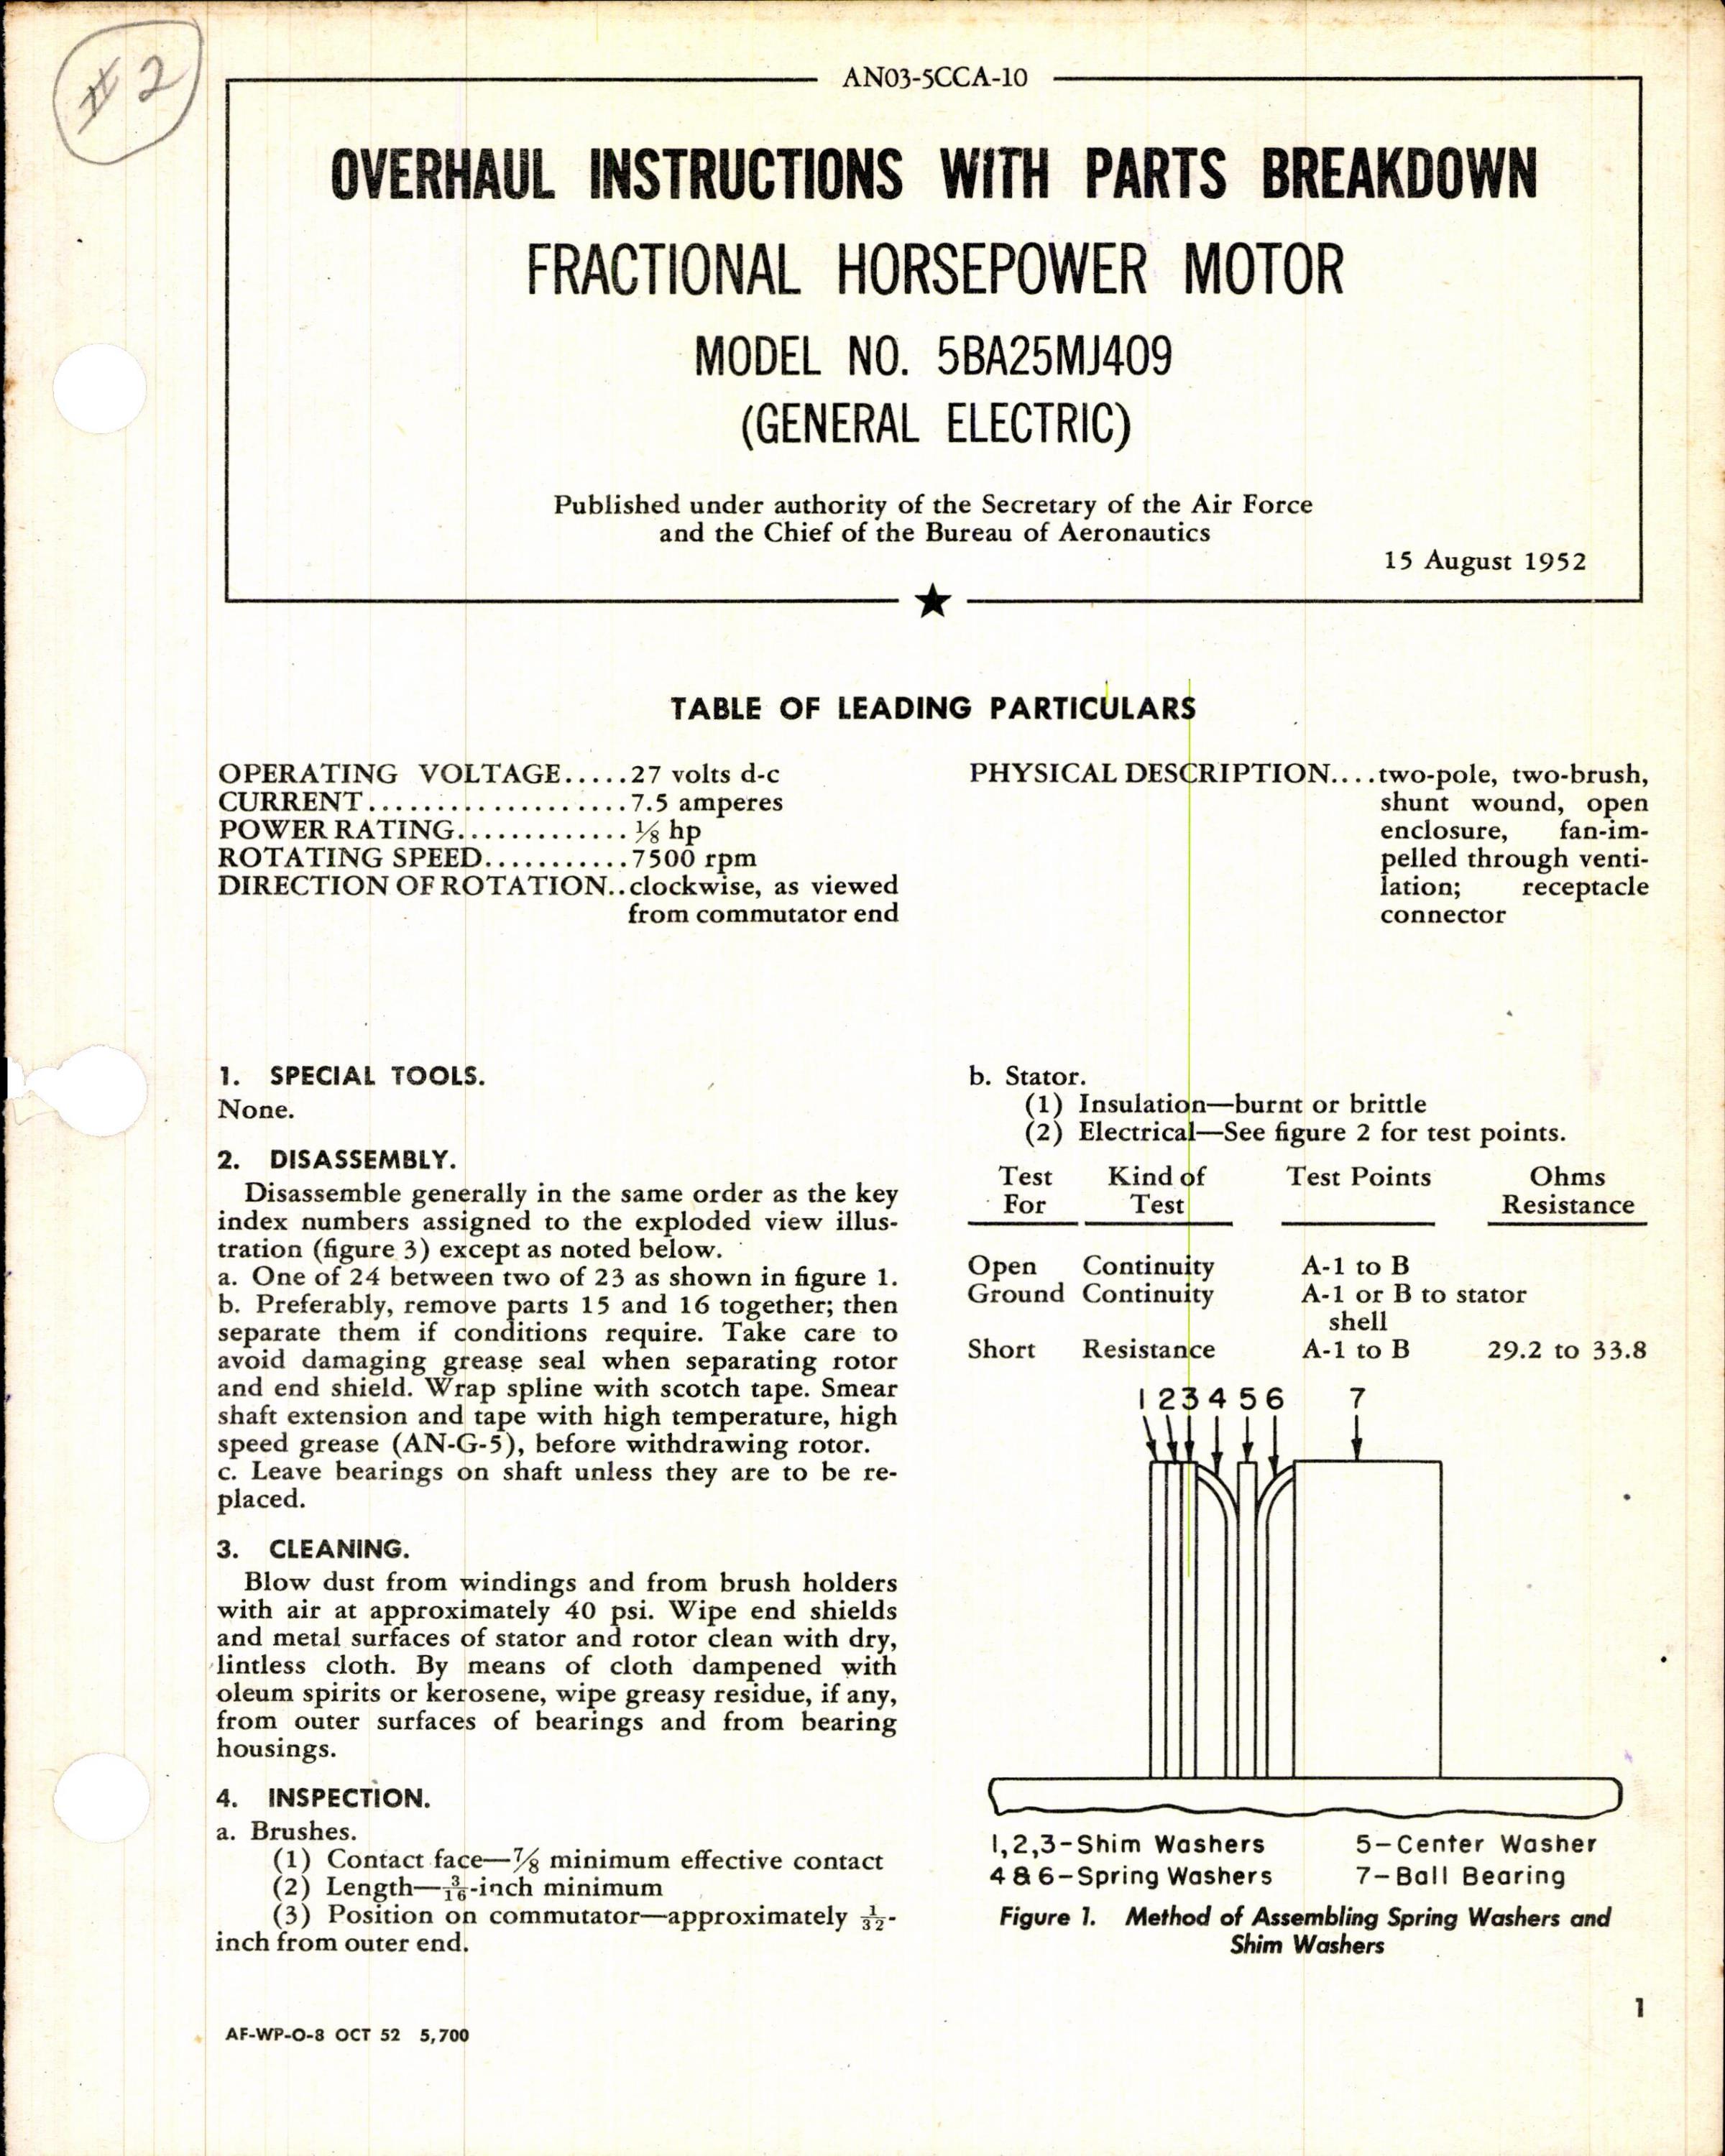 Sample page 1 from AirCorps Library document: Overhaul Instructions with Parts Breakdown for Fractional Horsepower Motor